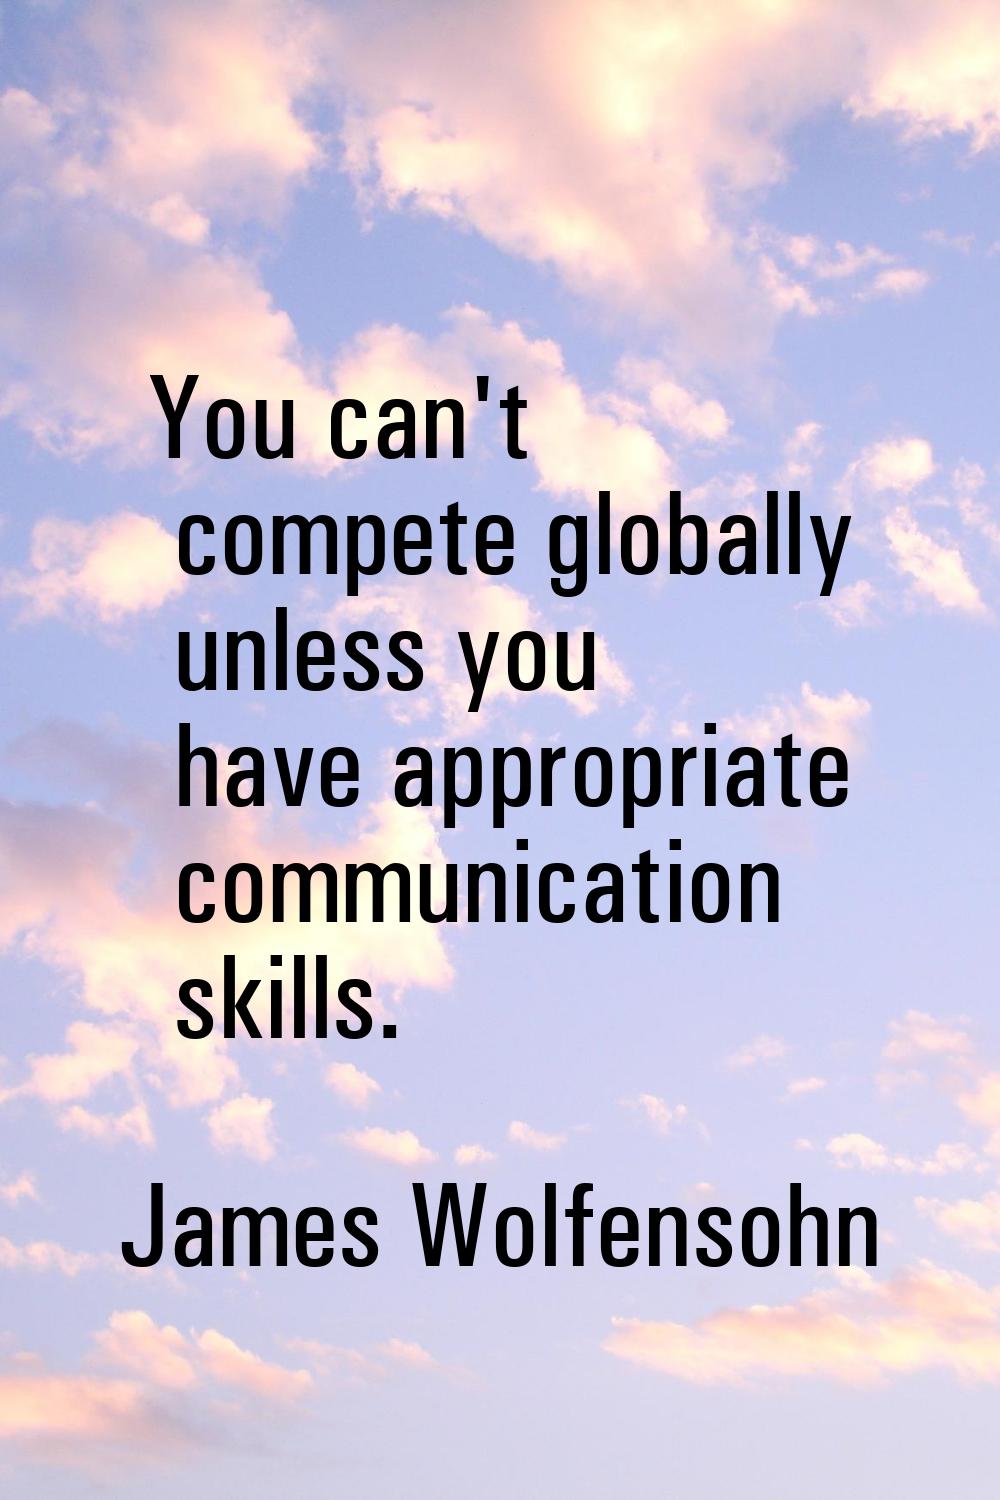 You can't compete globally unless you have appropriate communication skills.